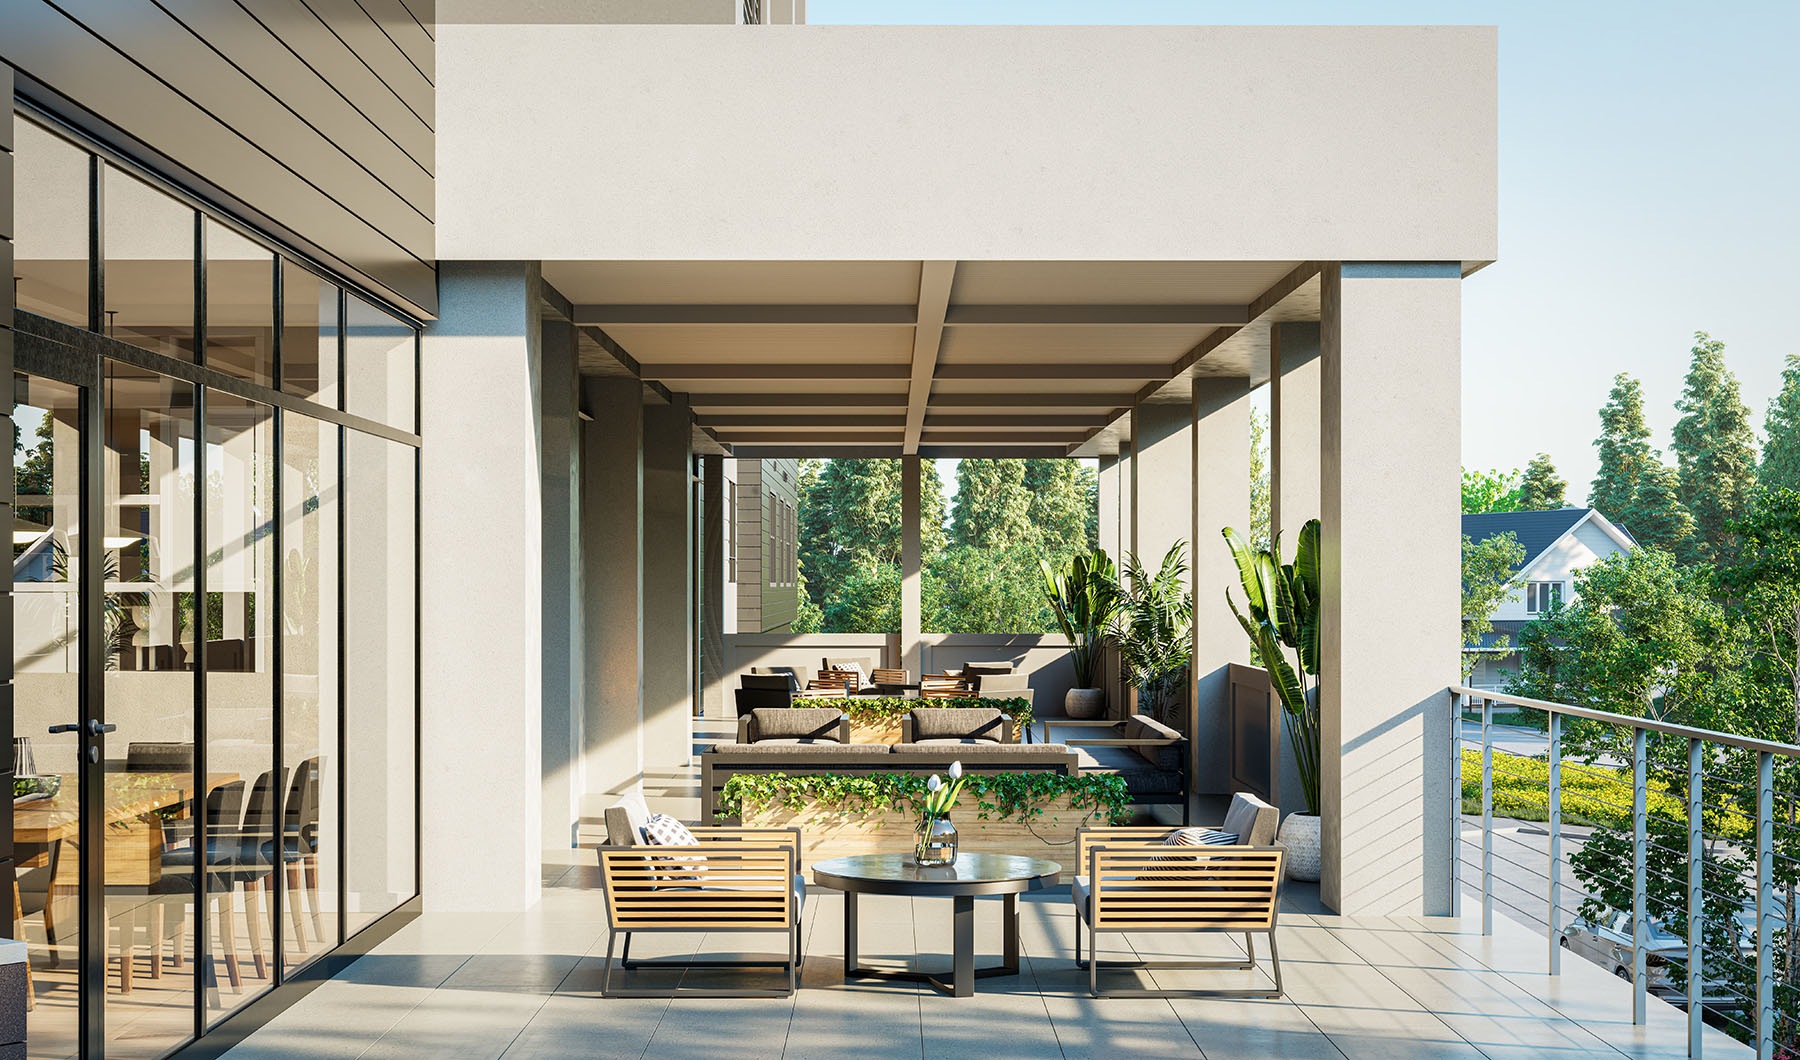 sanctuary winchester west apartments rendering showing outdoor terrace deck